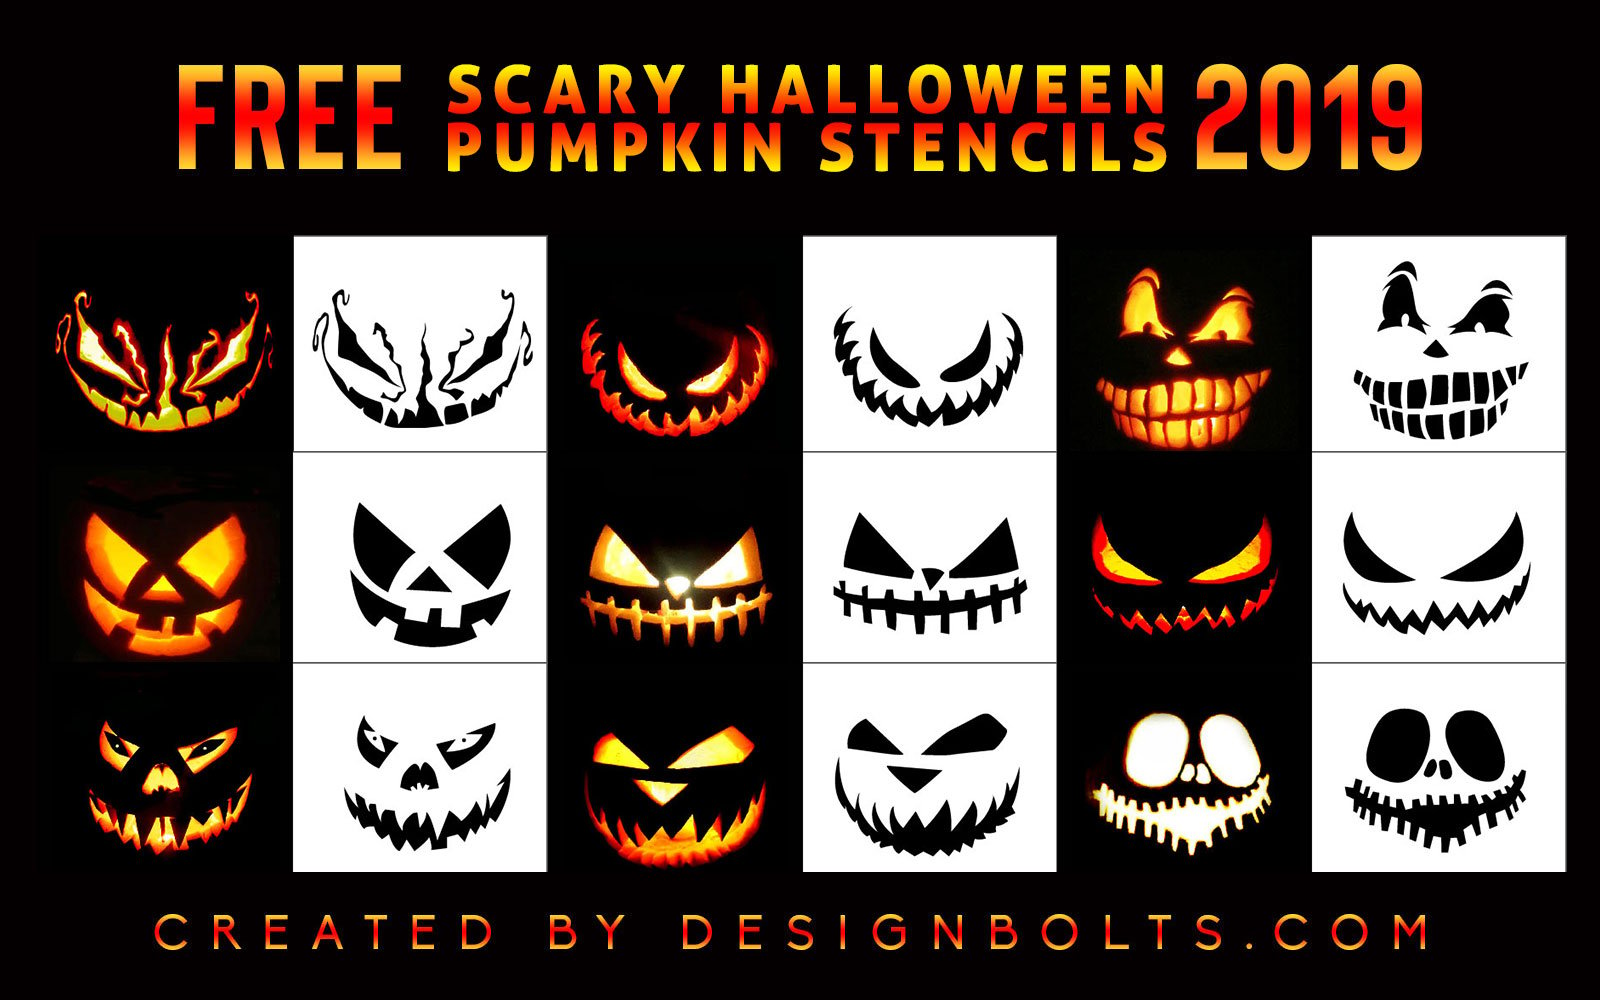 10 Free Scary Halloween Pumpkin Carving Stencils, Printable Patterns